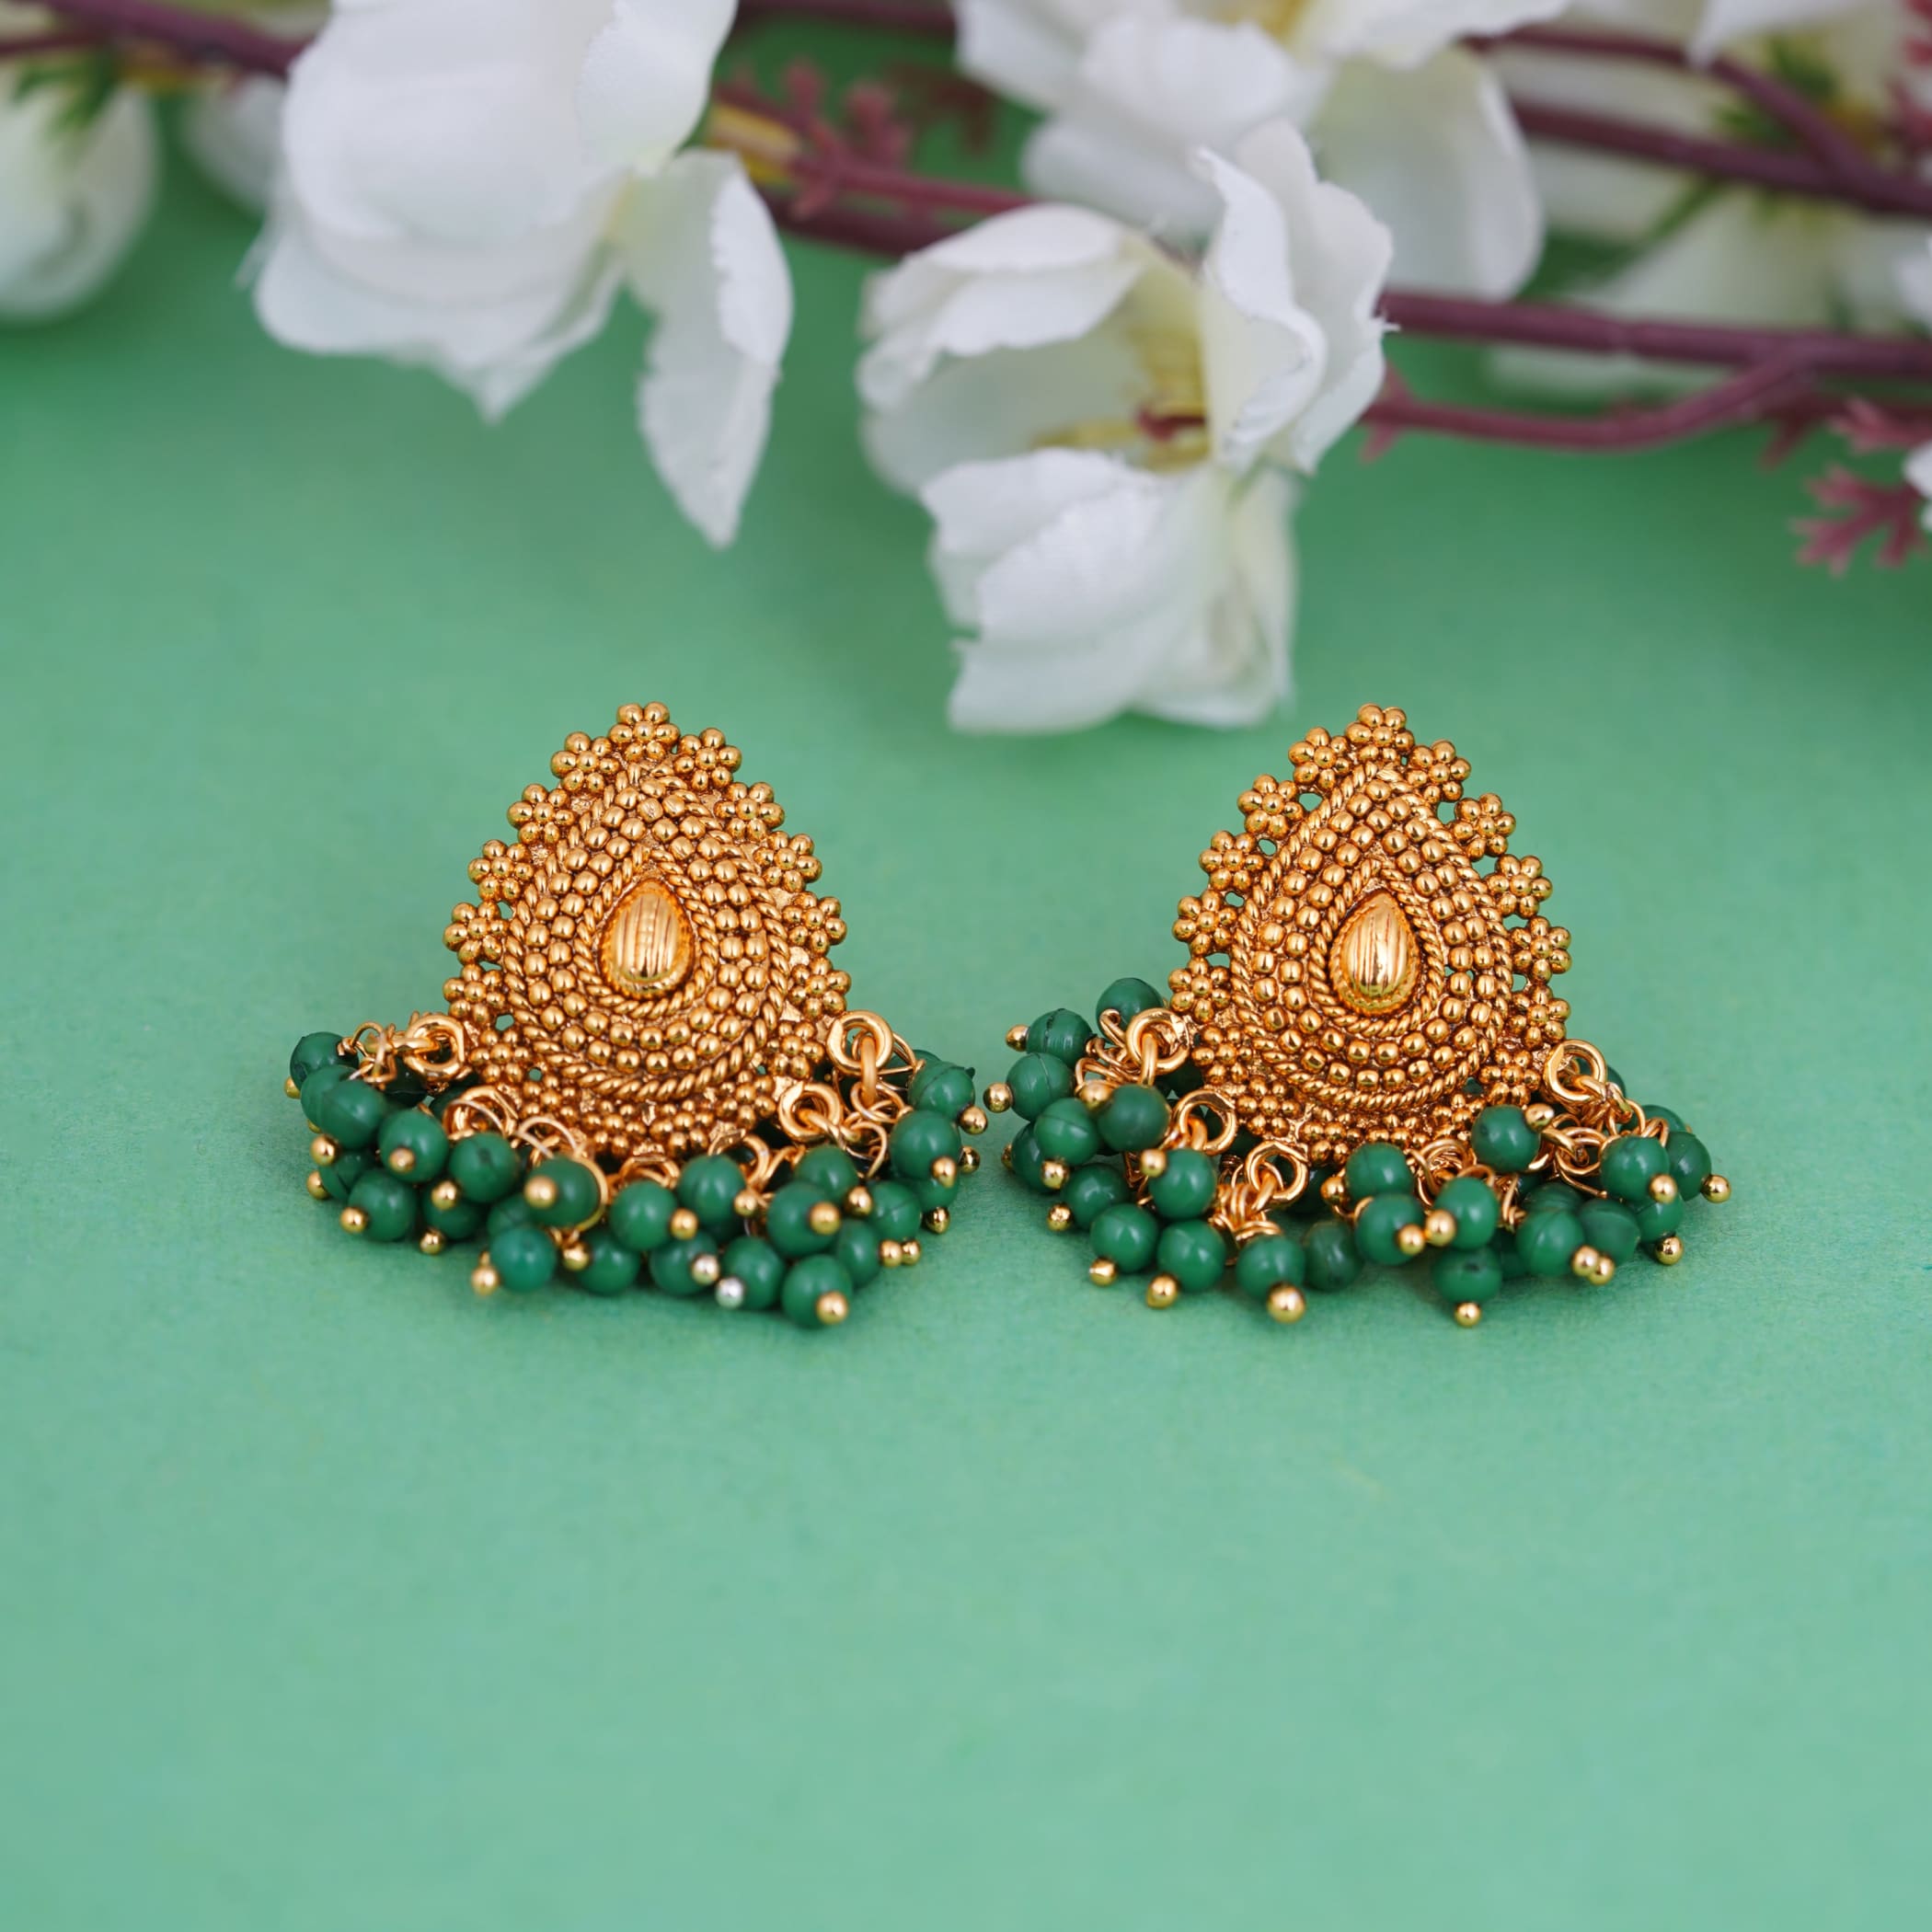 South Indian Gold Plated Screw Lock Jhumka Earrings  Traditional Design   Low Price J25901